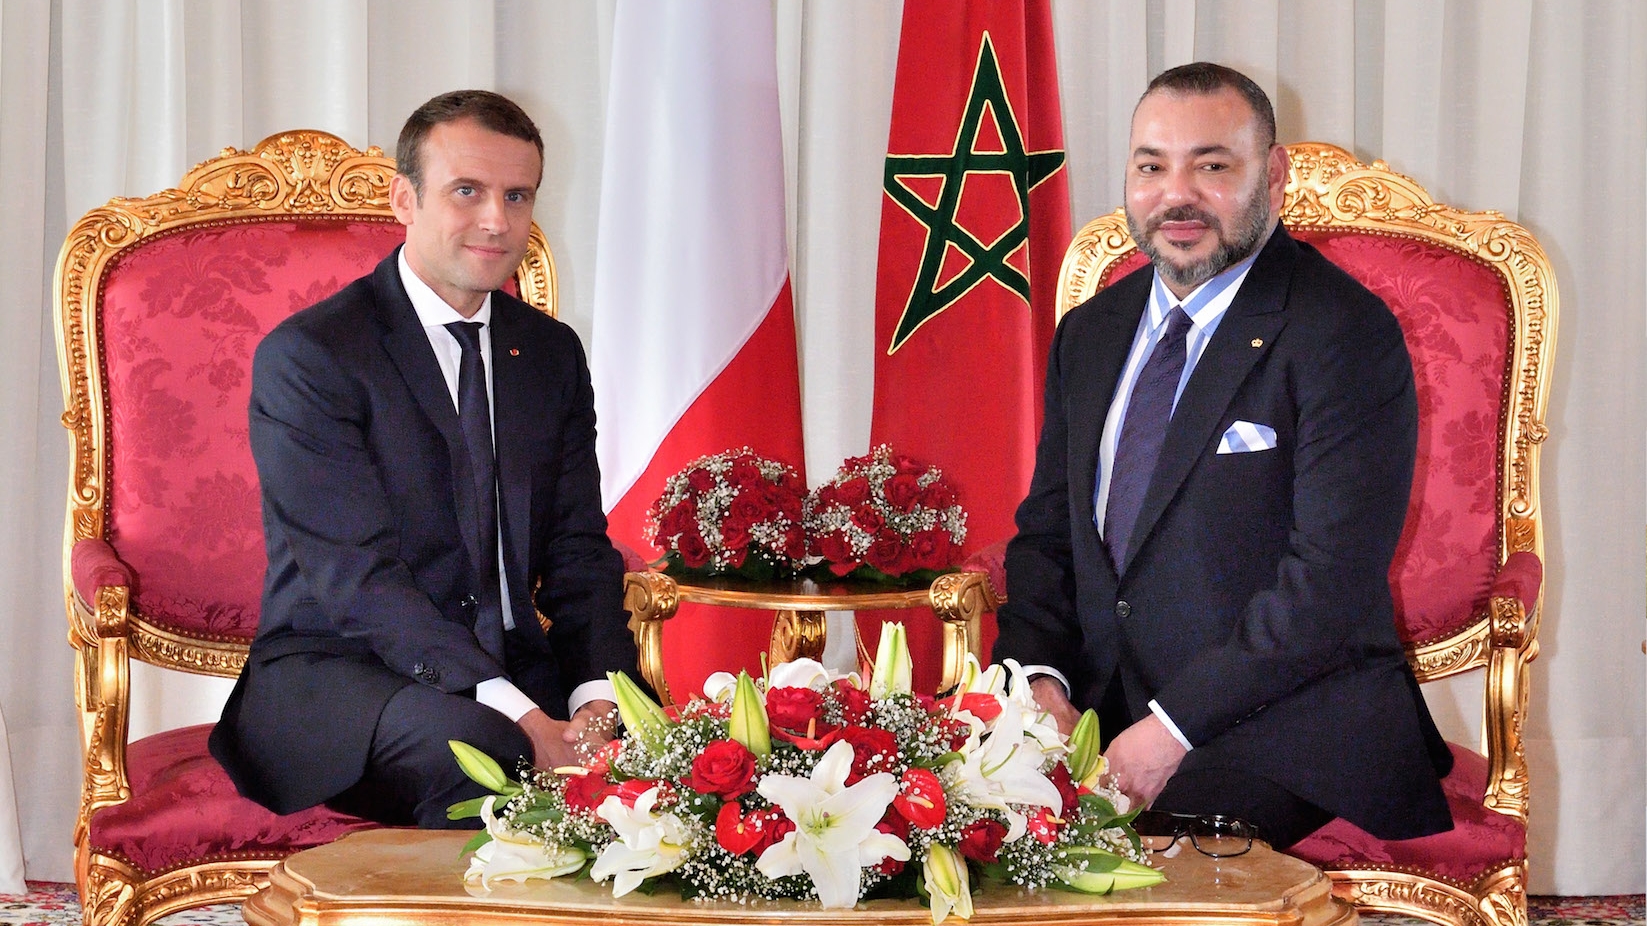 French President hails the remarkable successes achieved by Morocco under reign of King Mohammed VI